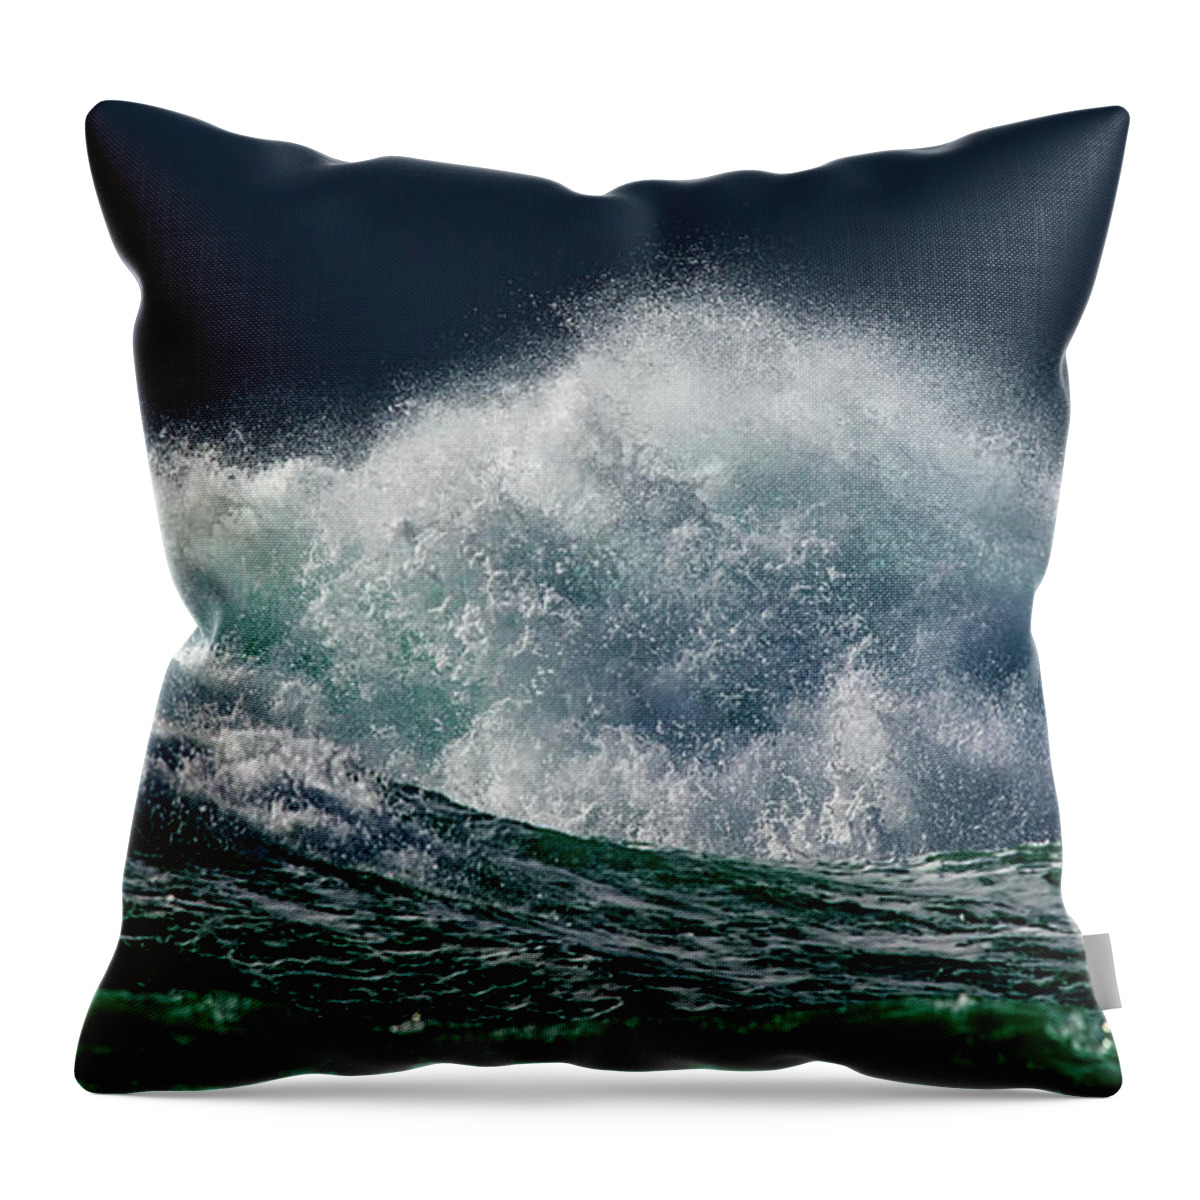 Fresh Throw Pillow featuring the photograph Intense by Stelios Kleanthous